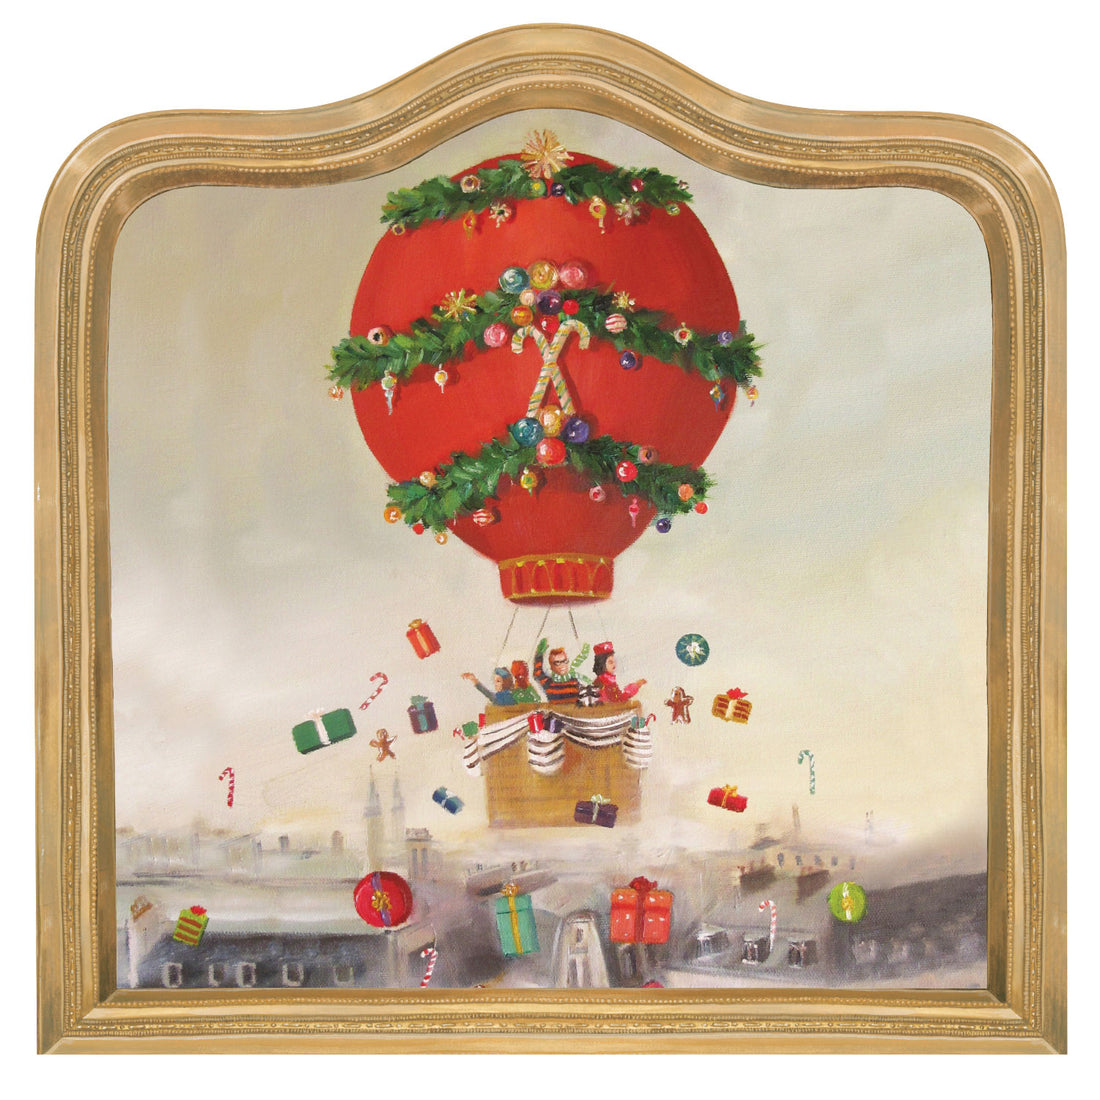 A painterly vintage-style illustration of a red hot air balloon decorated with garlands and Christmas ornaments, with three people tossing wrapped gifts and candy canes down from the balloon&